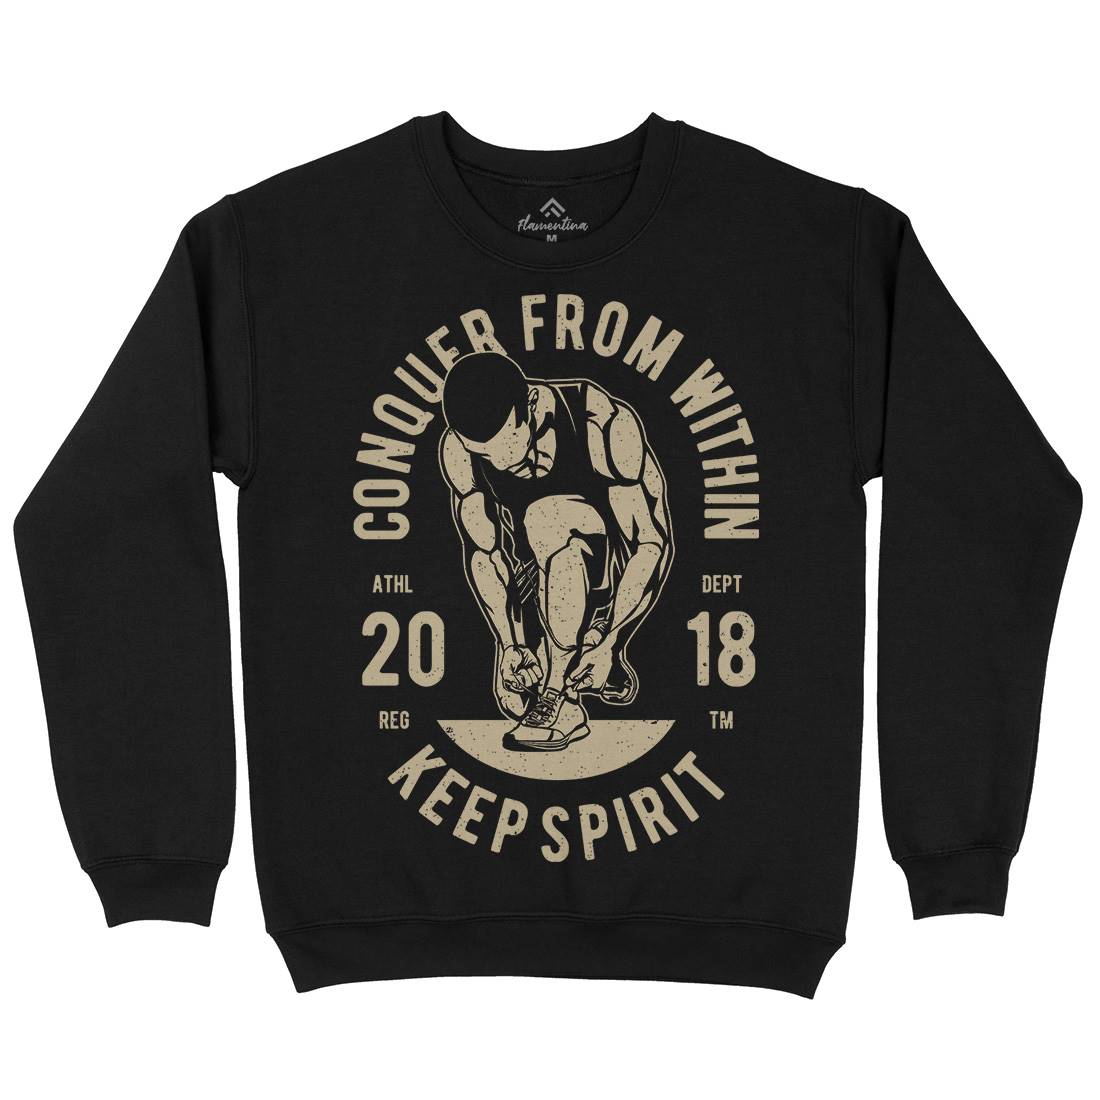 Conquer From Within Kids Crew Neck Sweatshirt Sport A638